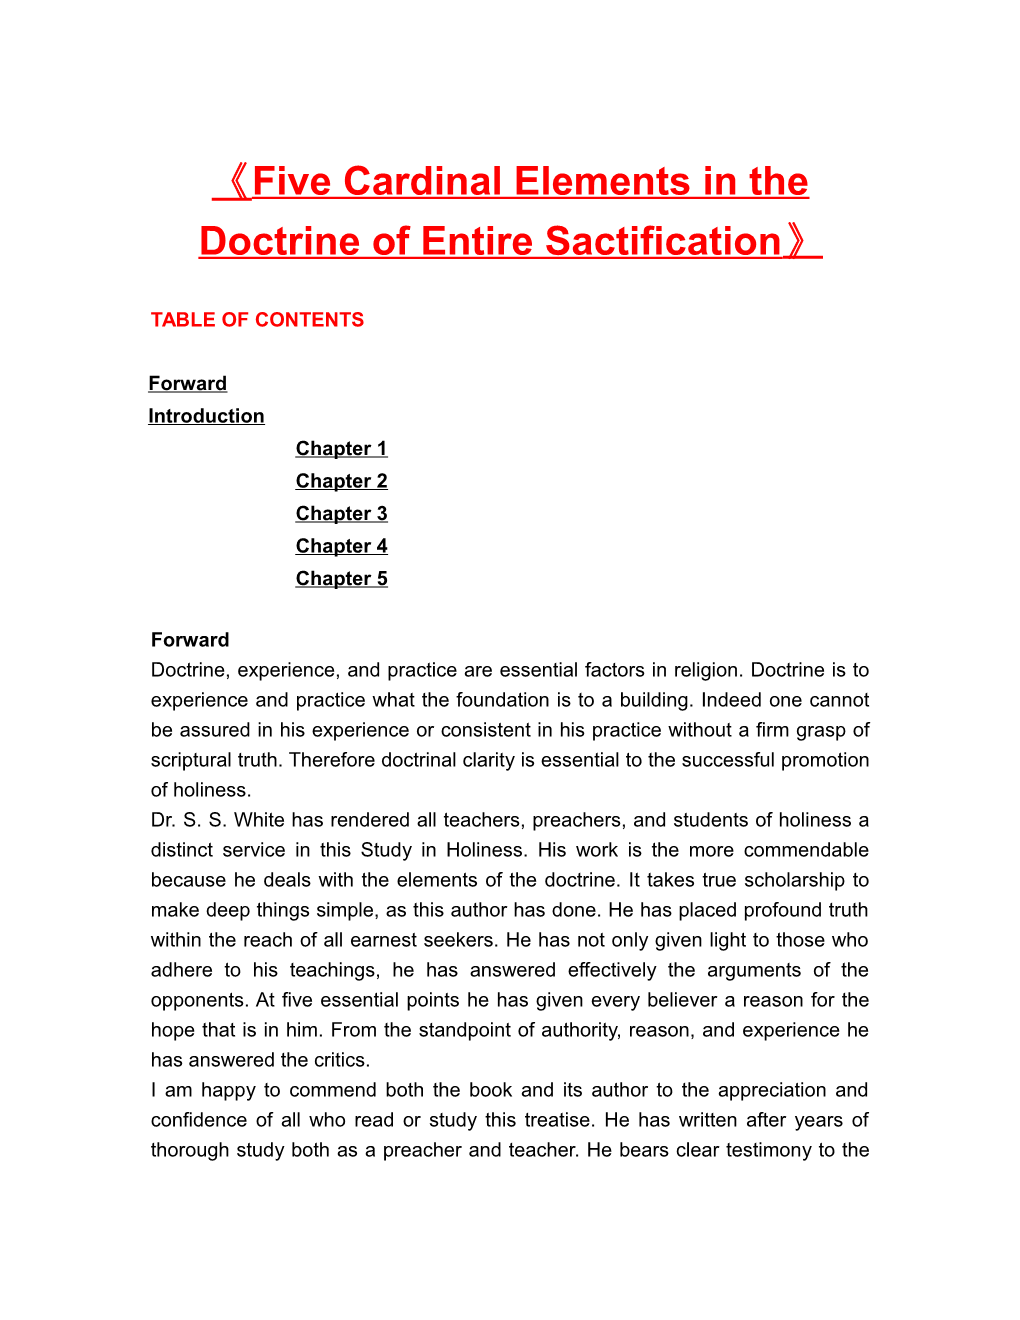 Five Cardinal Elements in the Doctrine of Entire Sactification